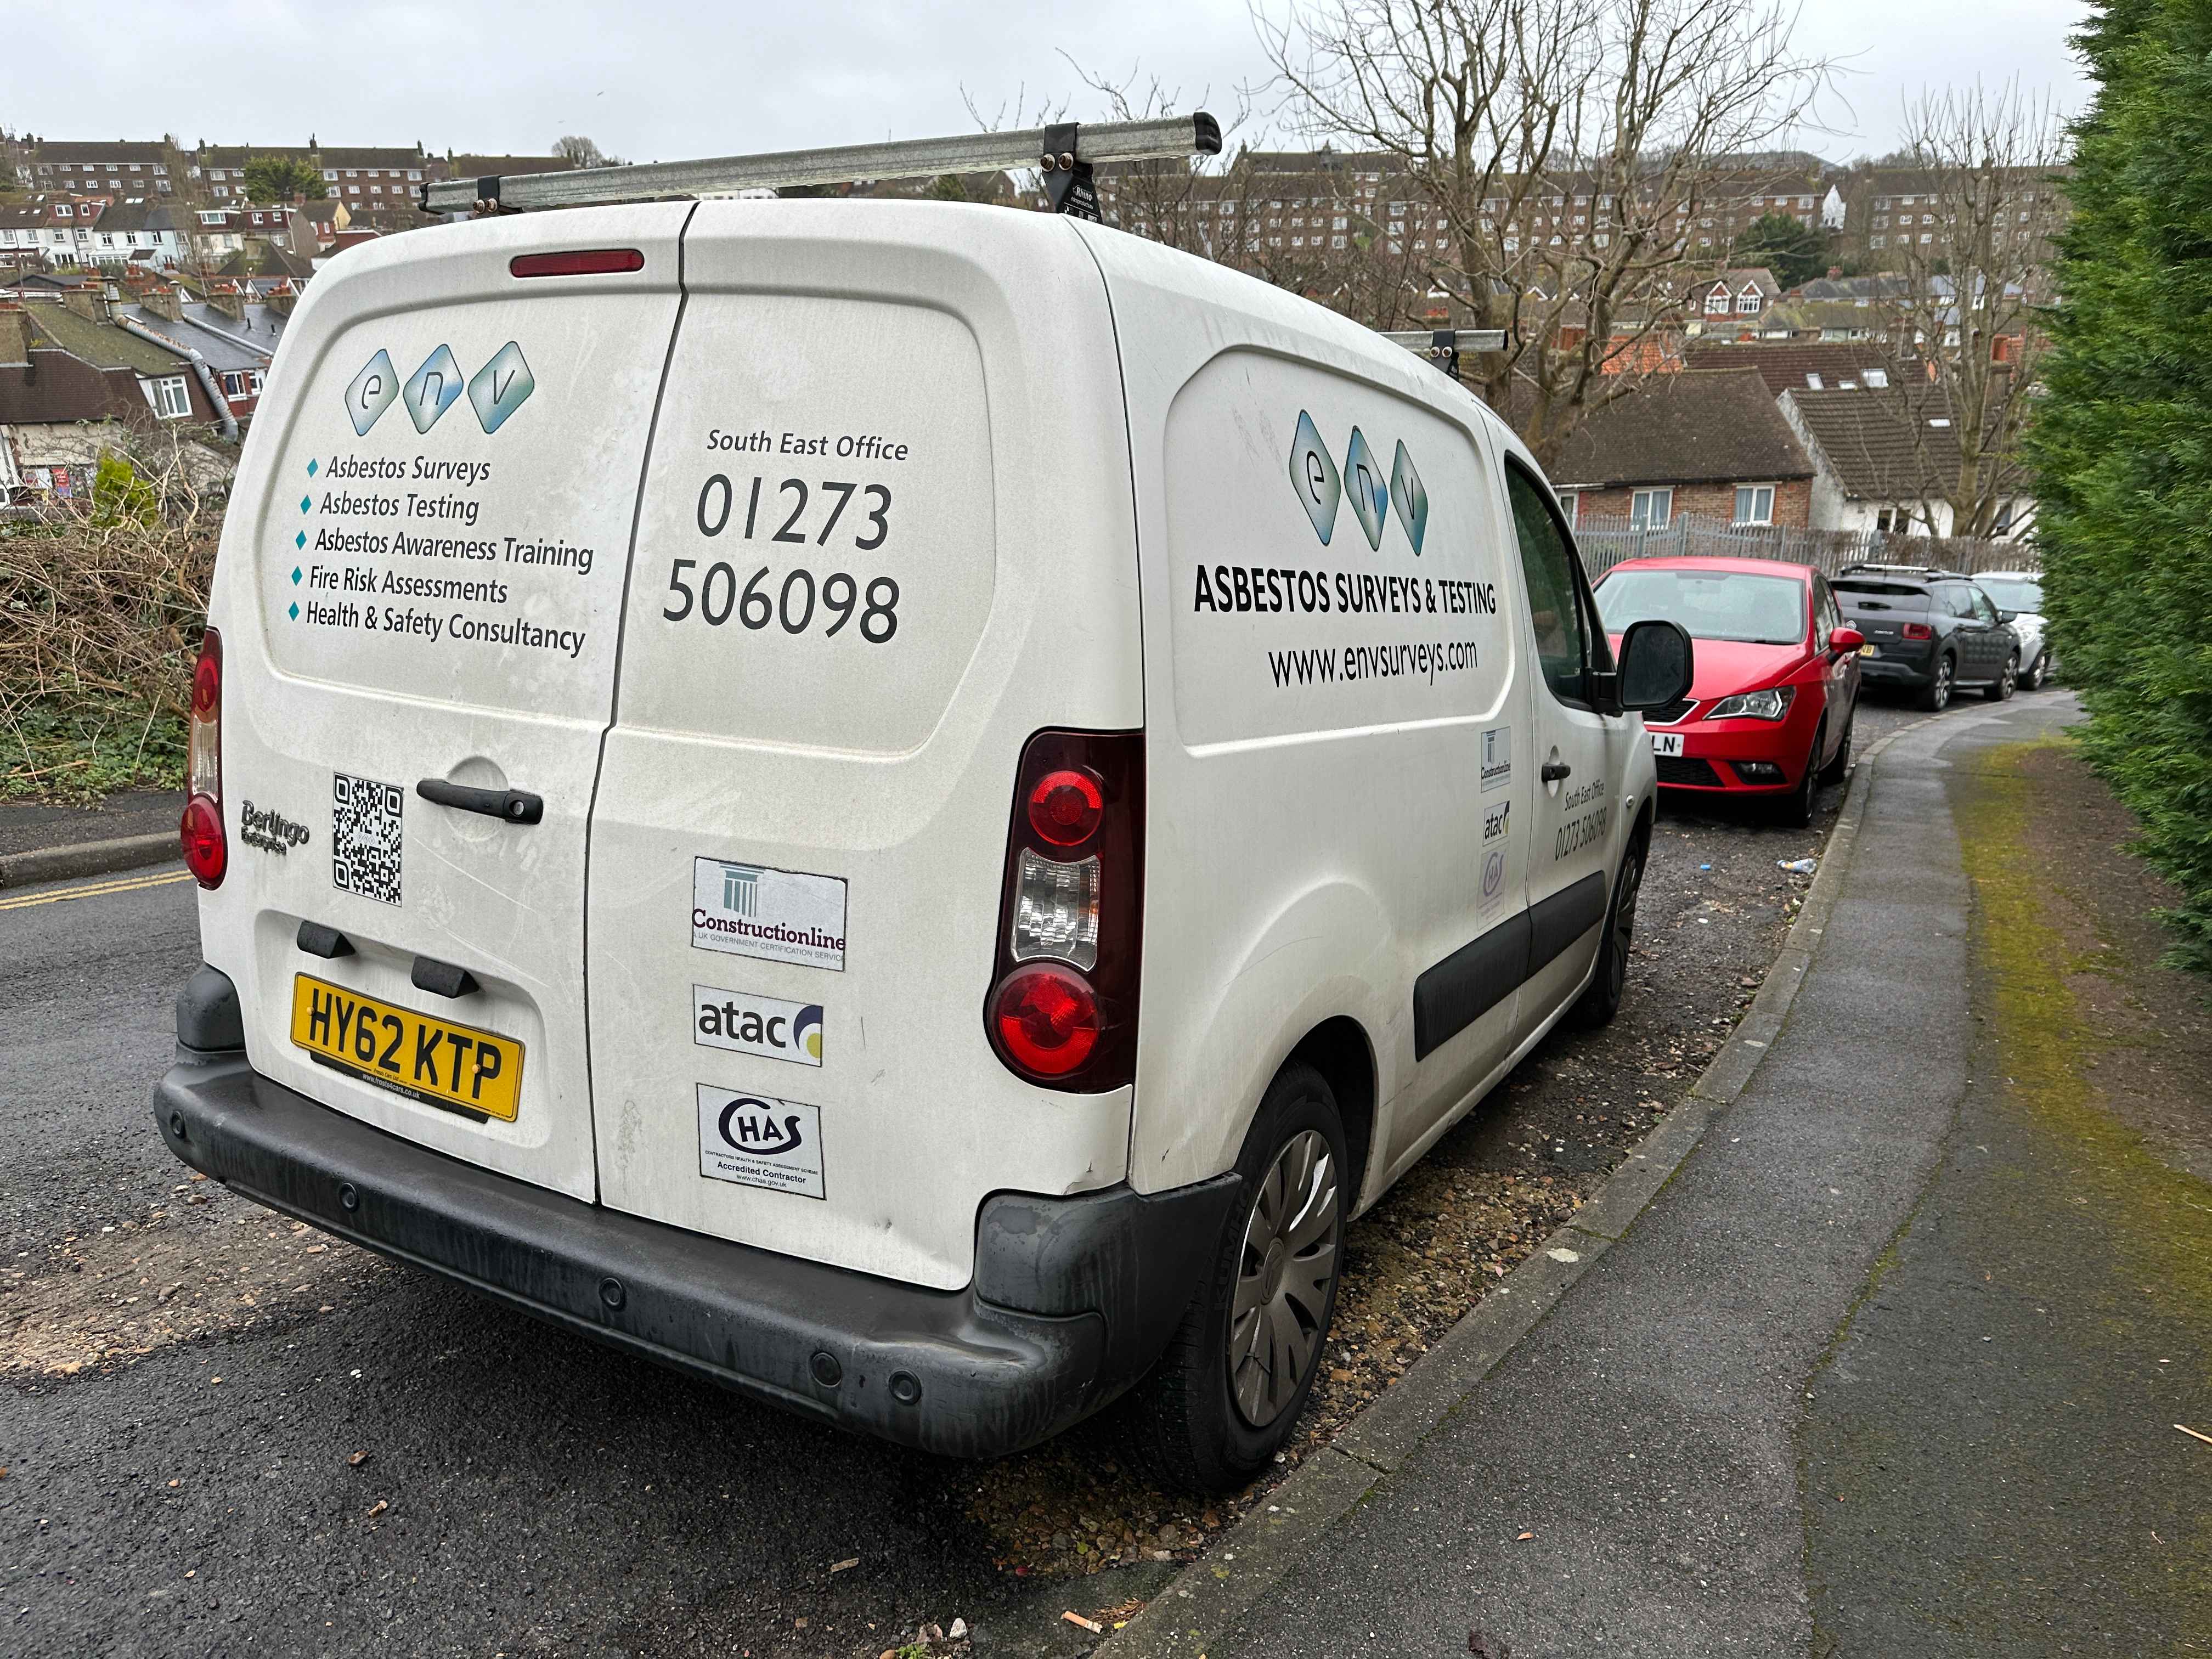 Photograph of HY62 KTP - a White Citroen Berlingo parked in Hollingdean by a non-resident. The sixth of six photographs supplied by the residents of Hollingdean.